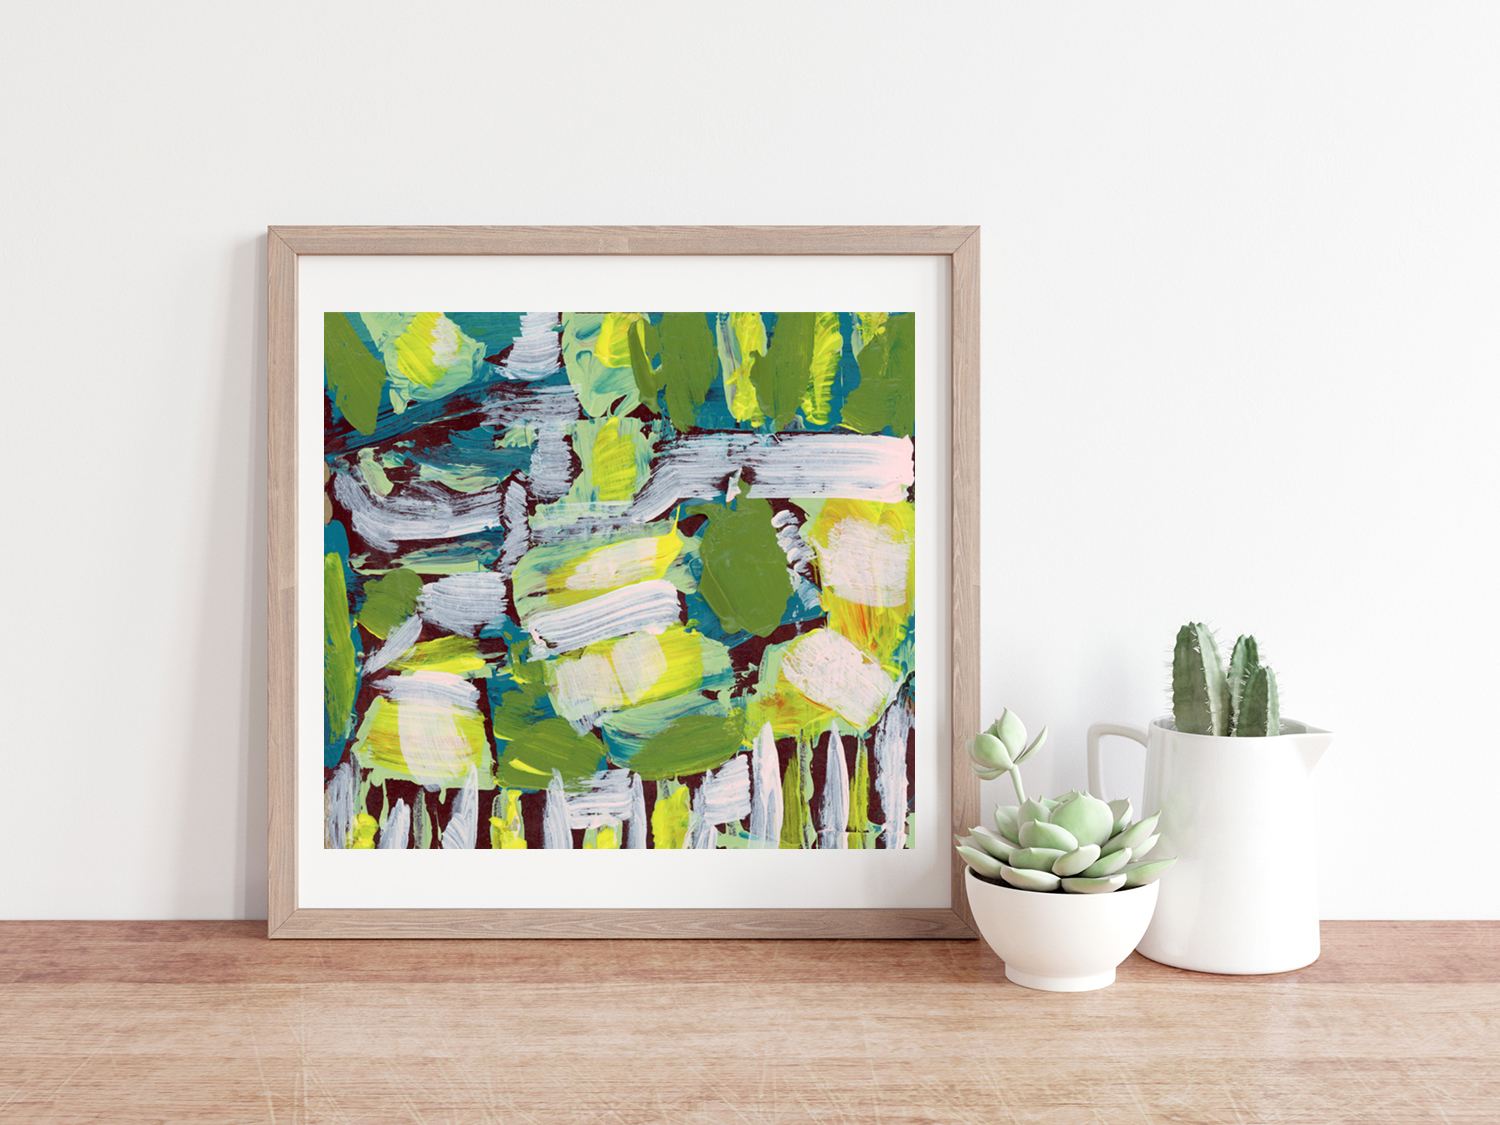 Katie Jeanne Wood - Relaxation & Rejuvenation Green & yellow abstract prints